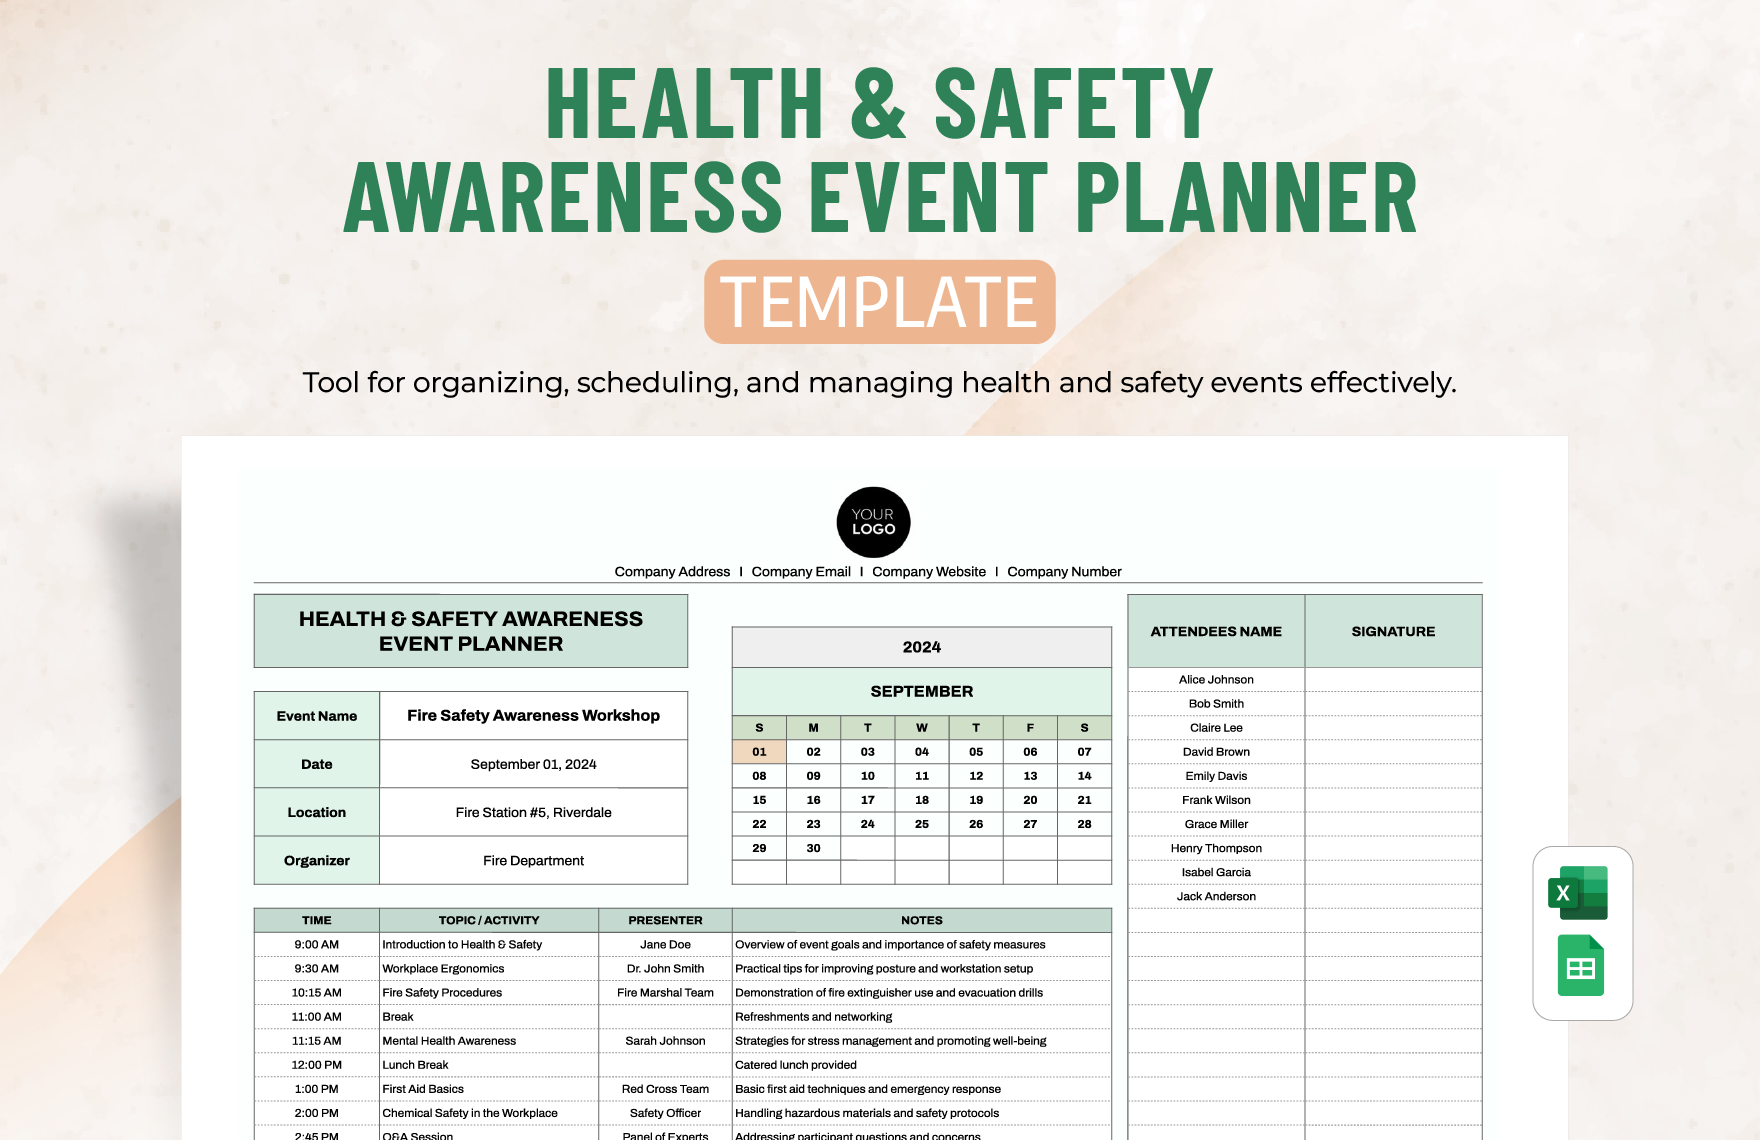 Health & Safety Awareness Event Planner Template in Excel, Google Sheets